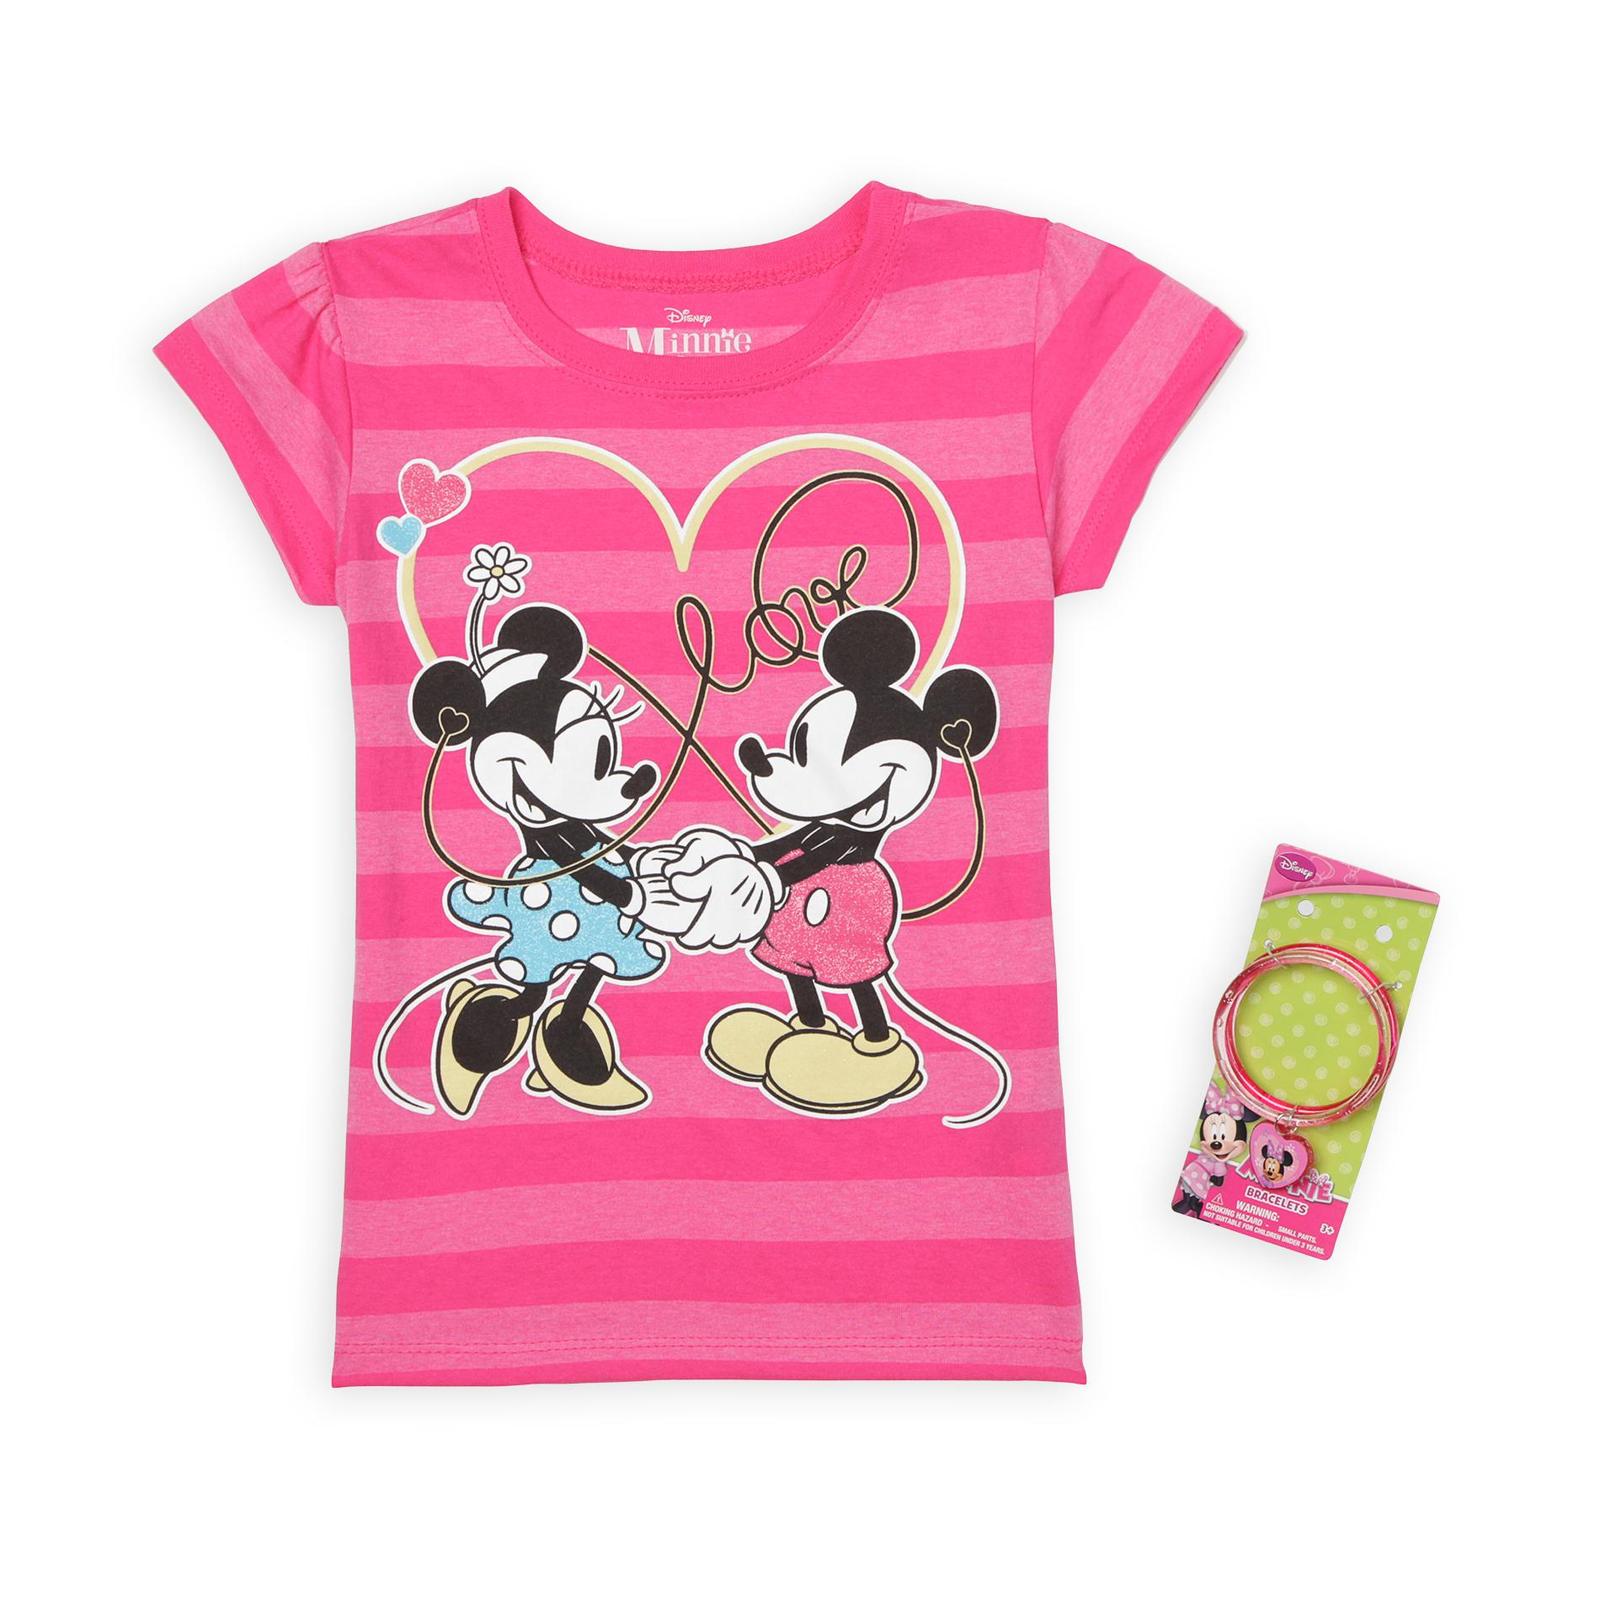 Disney Girl's Graphic T-Shirt & Bracelets - Mickey & Minnie Mouse